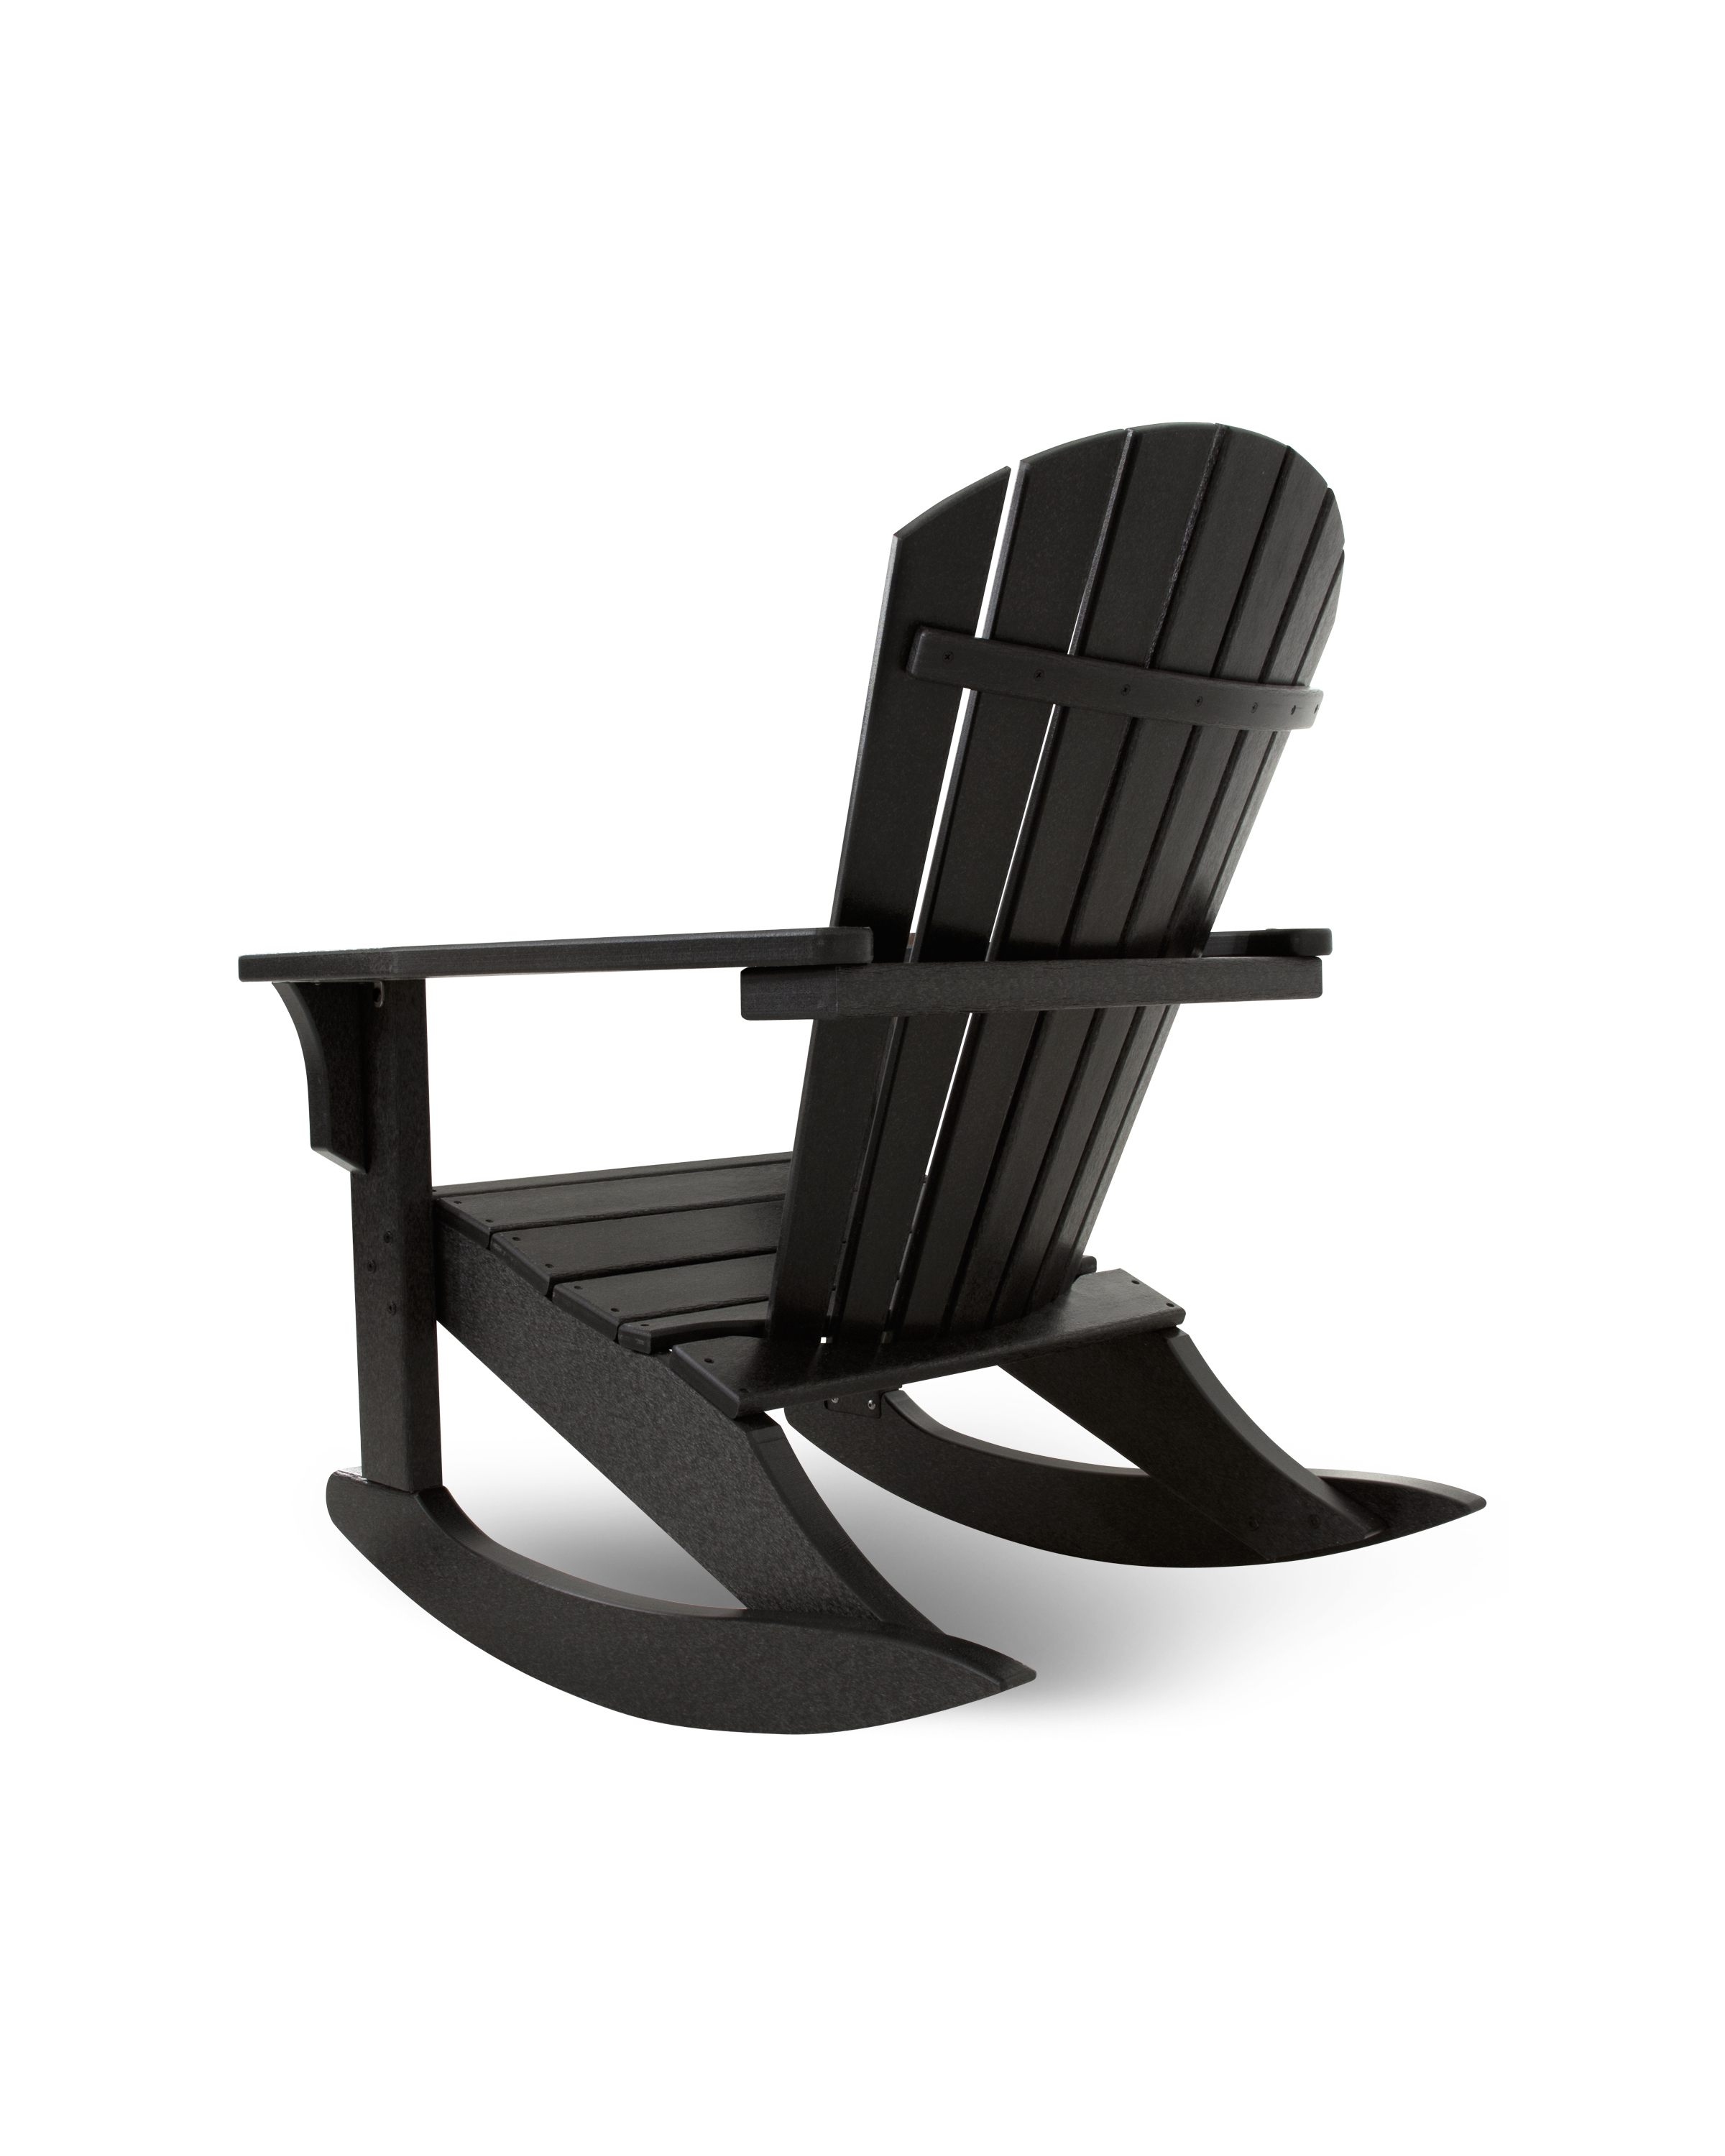 Imagine The Timeless Traditional Of A Rocking Chair Combined With The Classic, Yet Comfortable Design Of Your Favorite Outdoor Chair. You